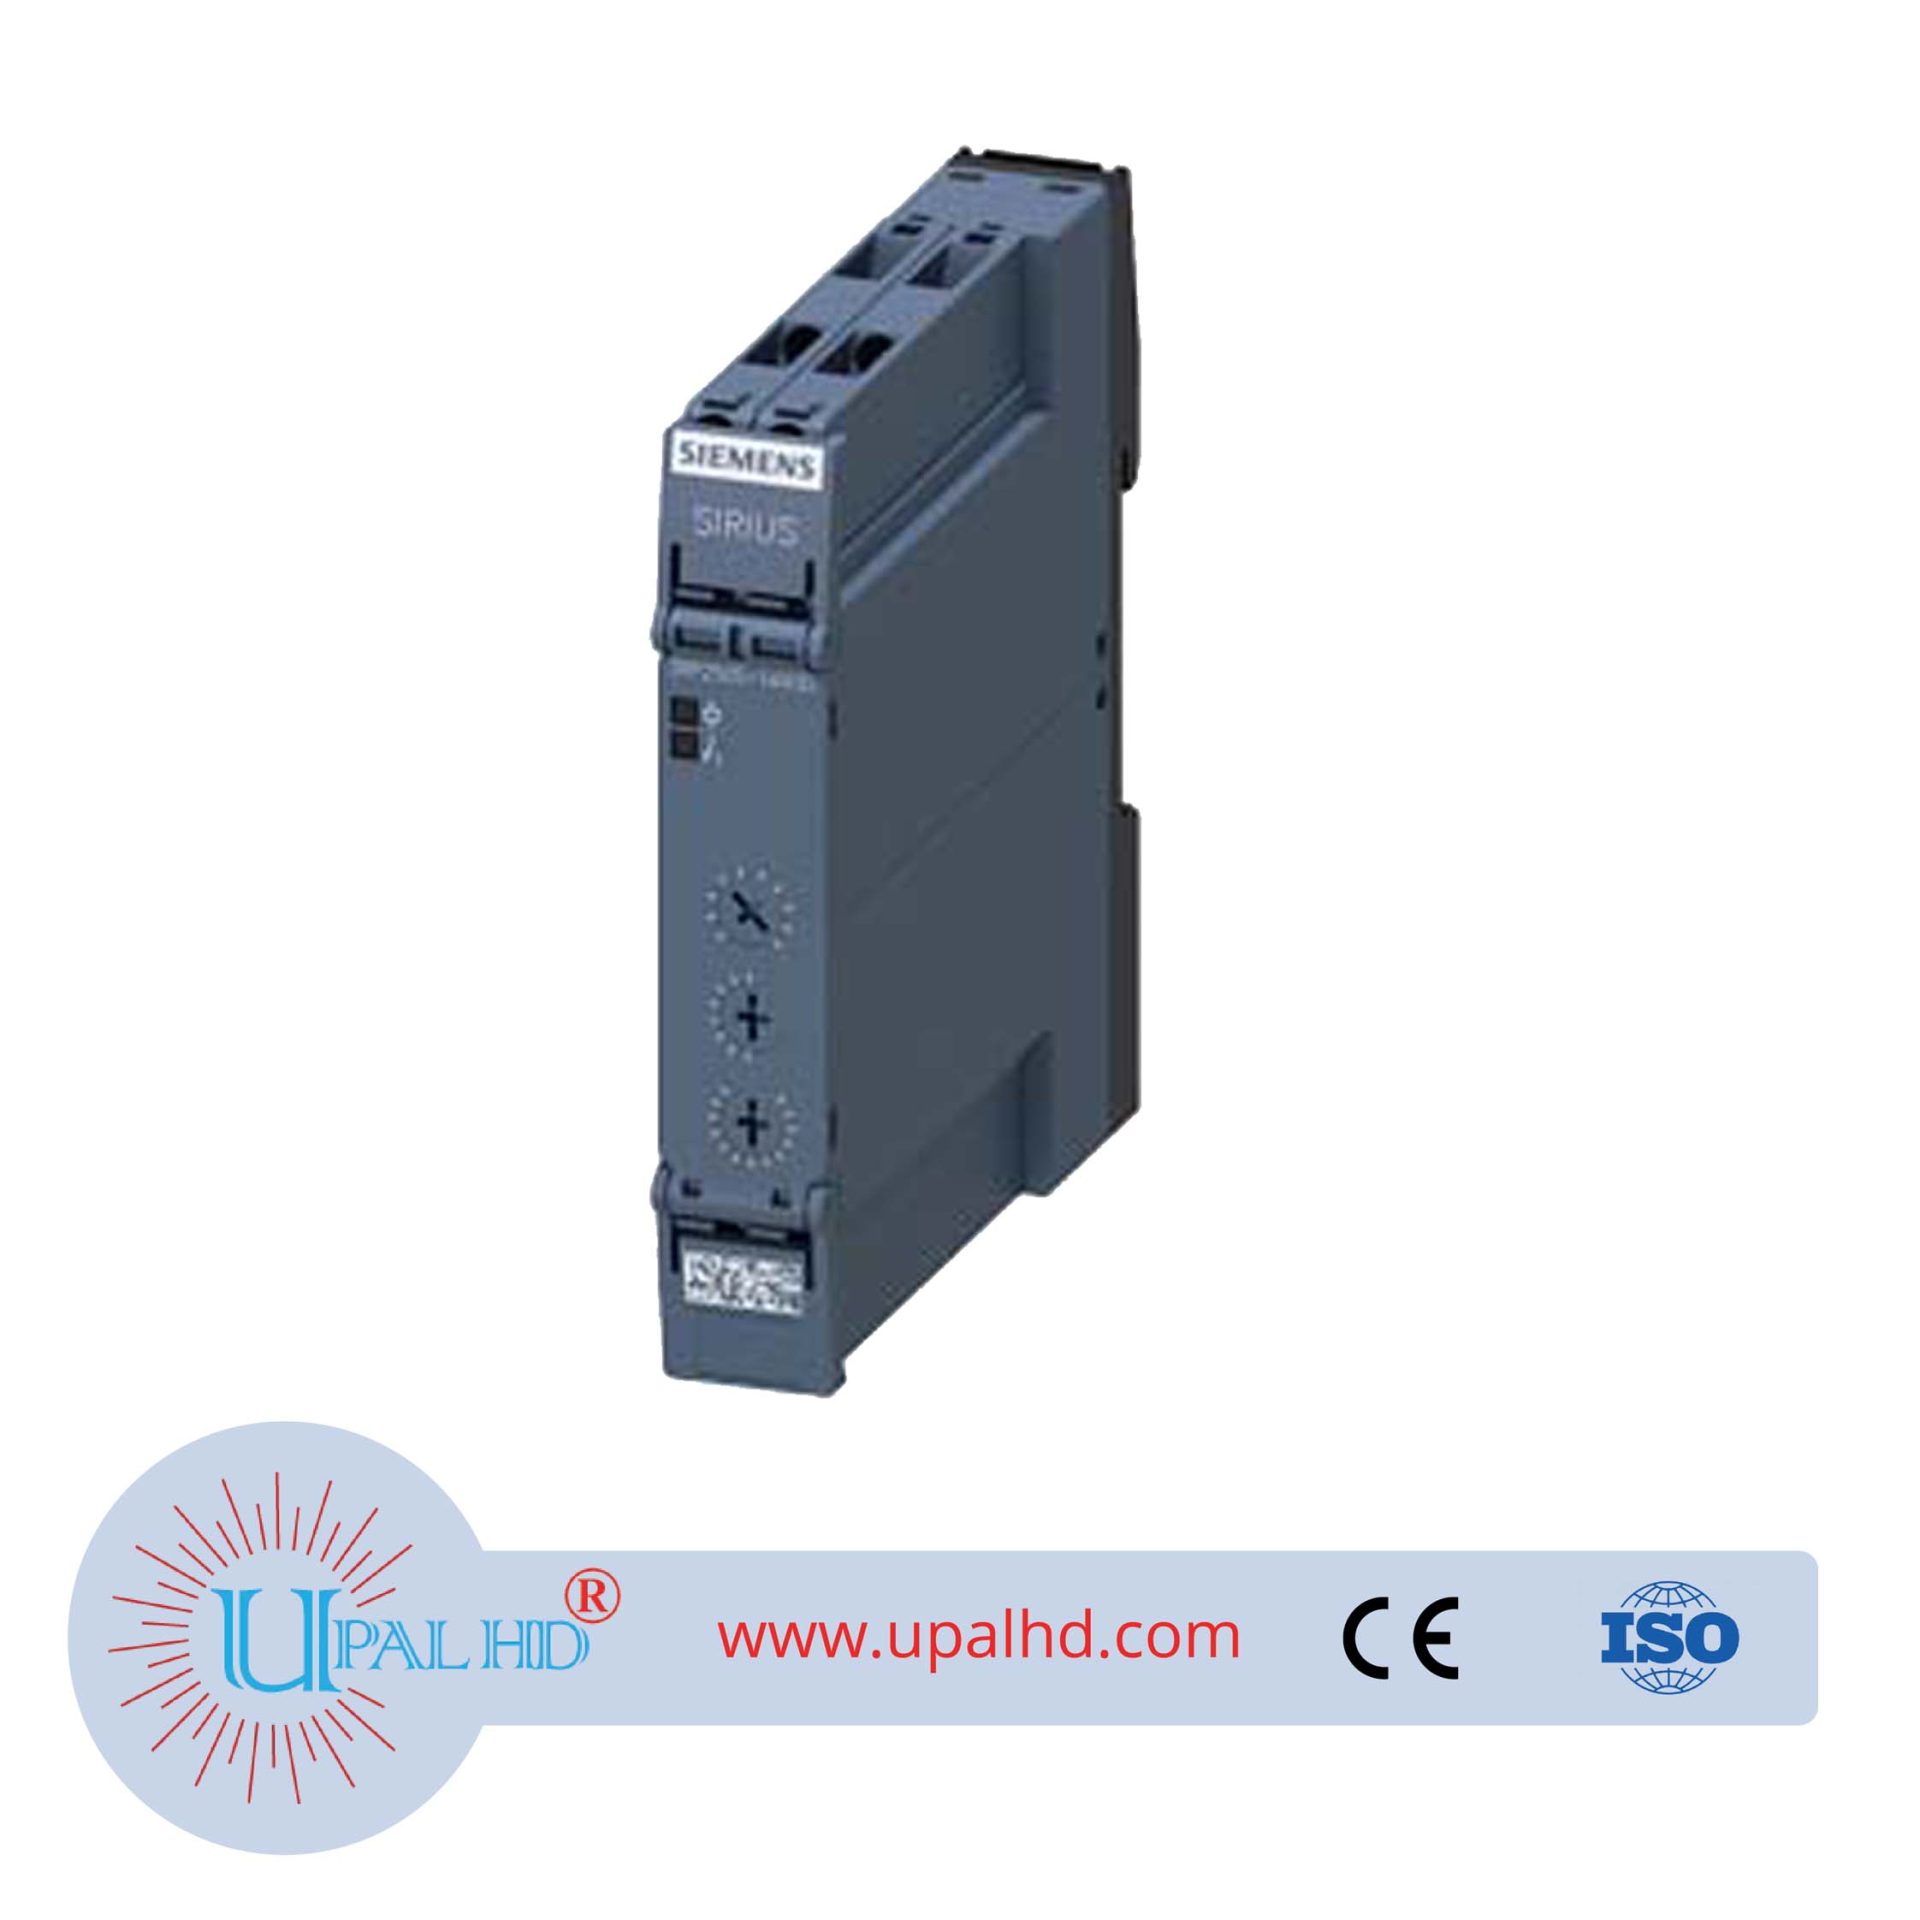 Time Relay, Response Delay, 1 Switching Contact, 7 Time Ranges, 0.05s-100h, AC/DC 12-240V